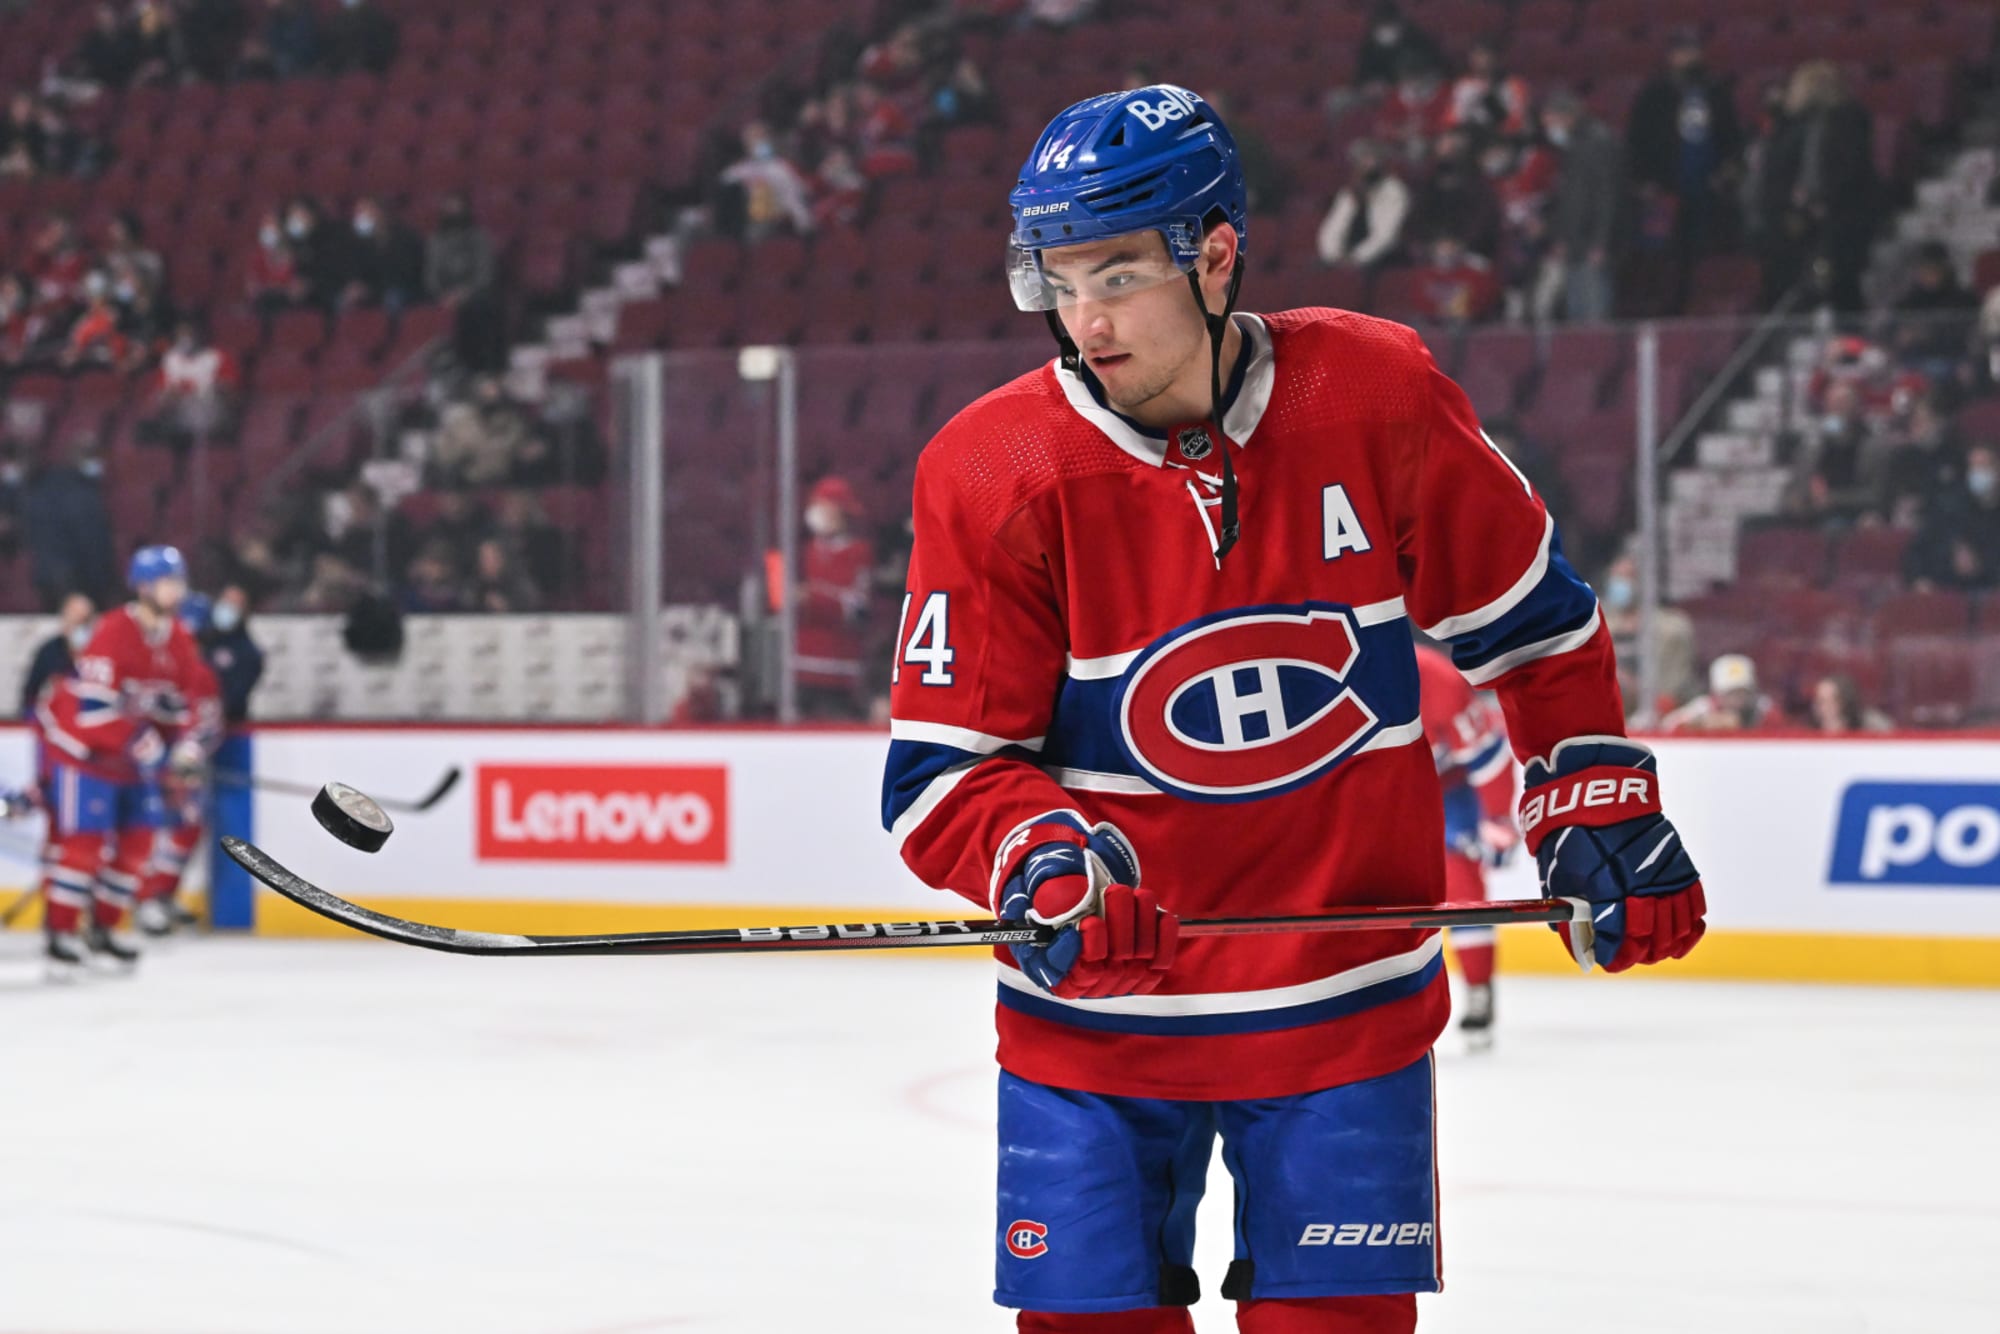  The Source for Montreal Canadiens Hockey: Team Captains